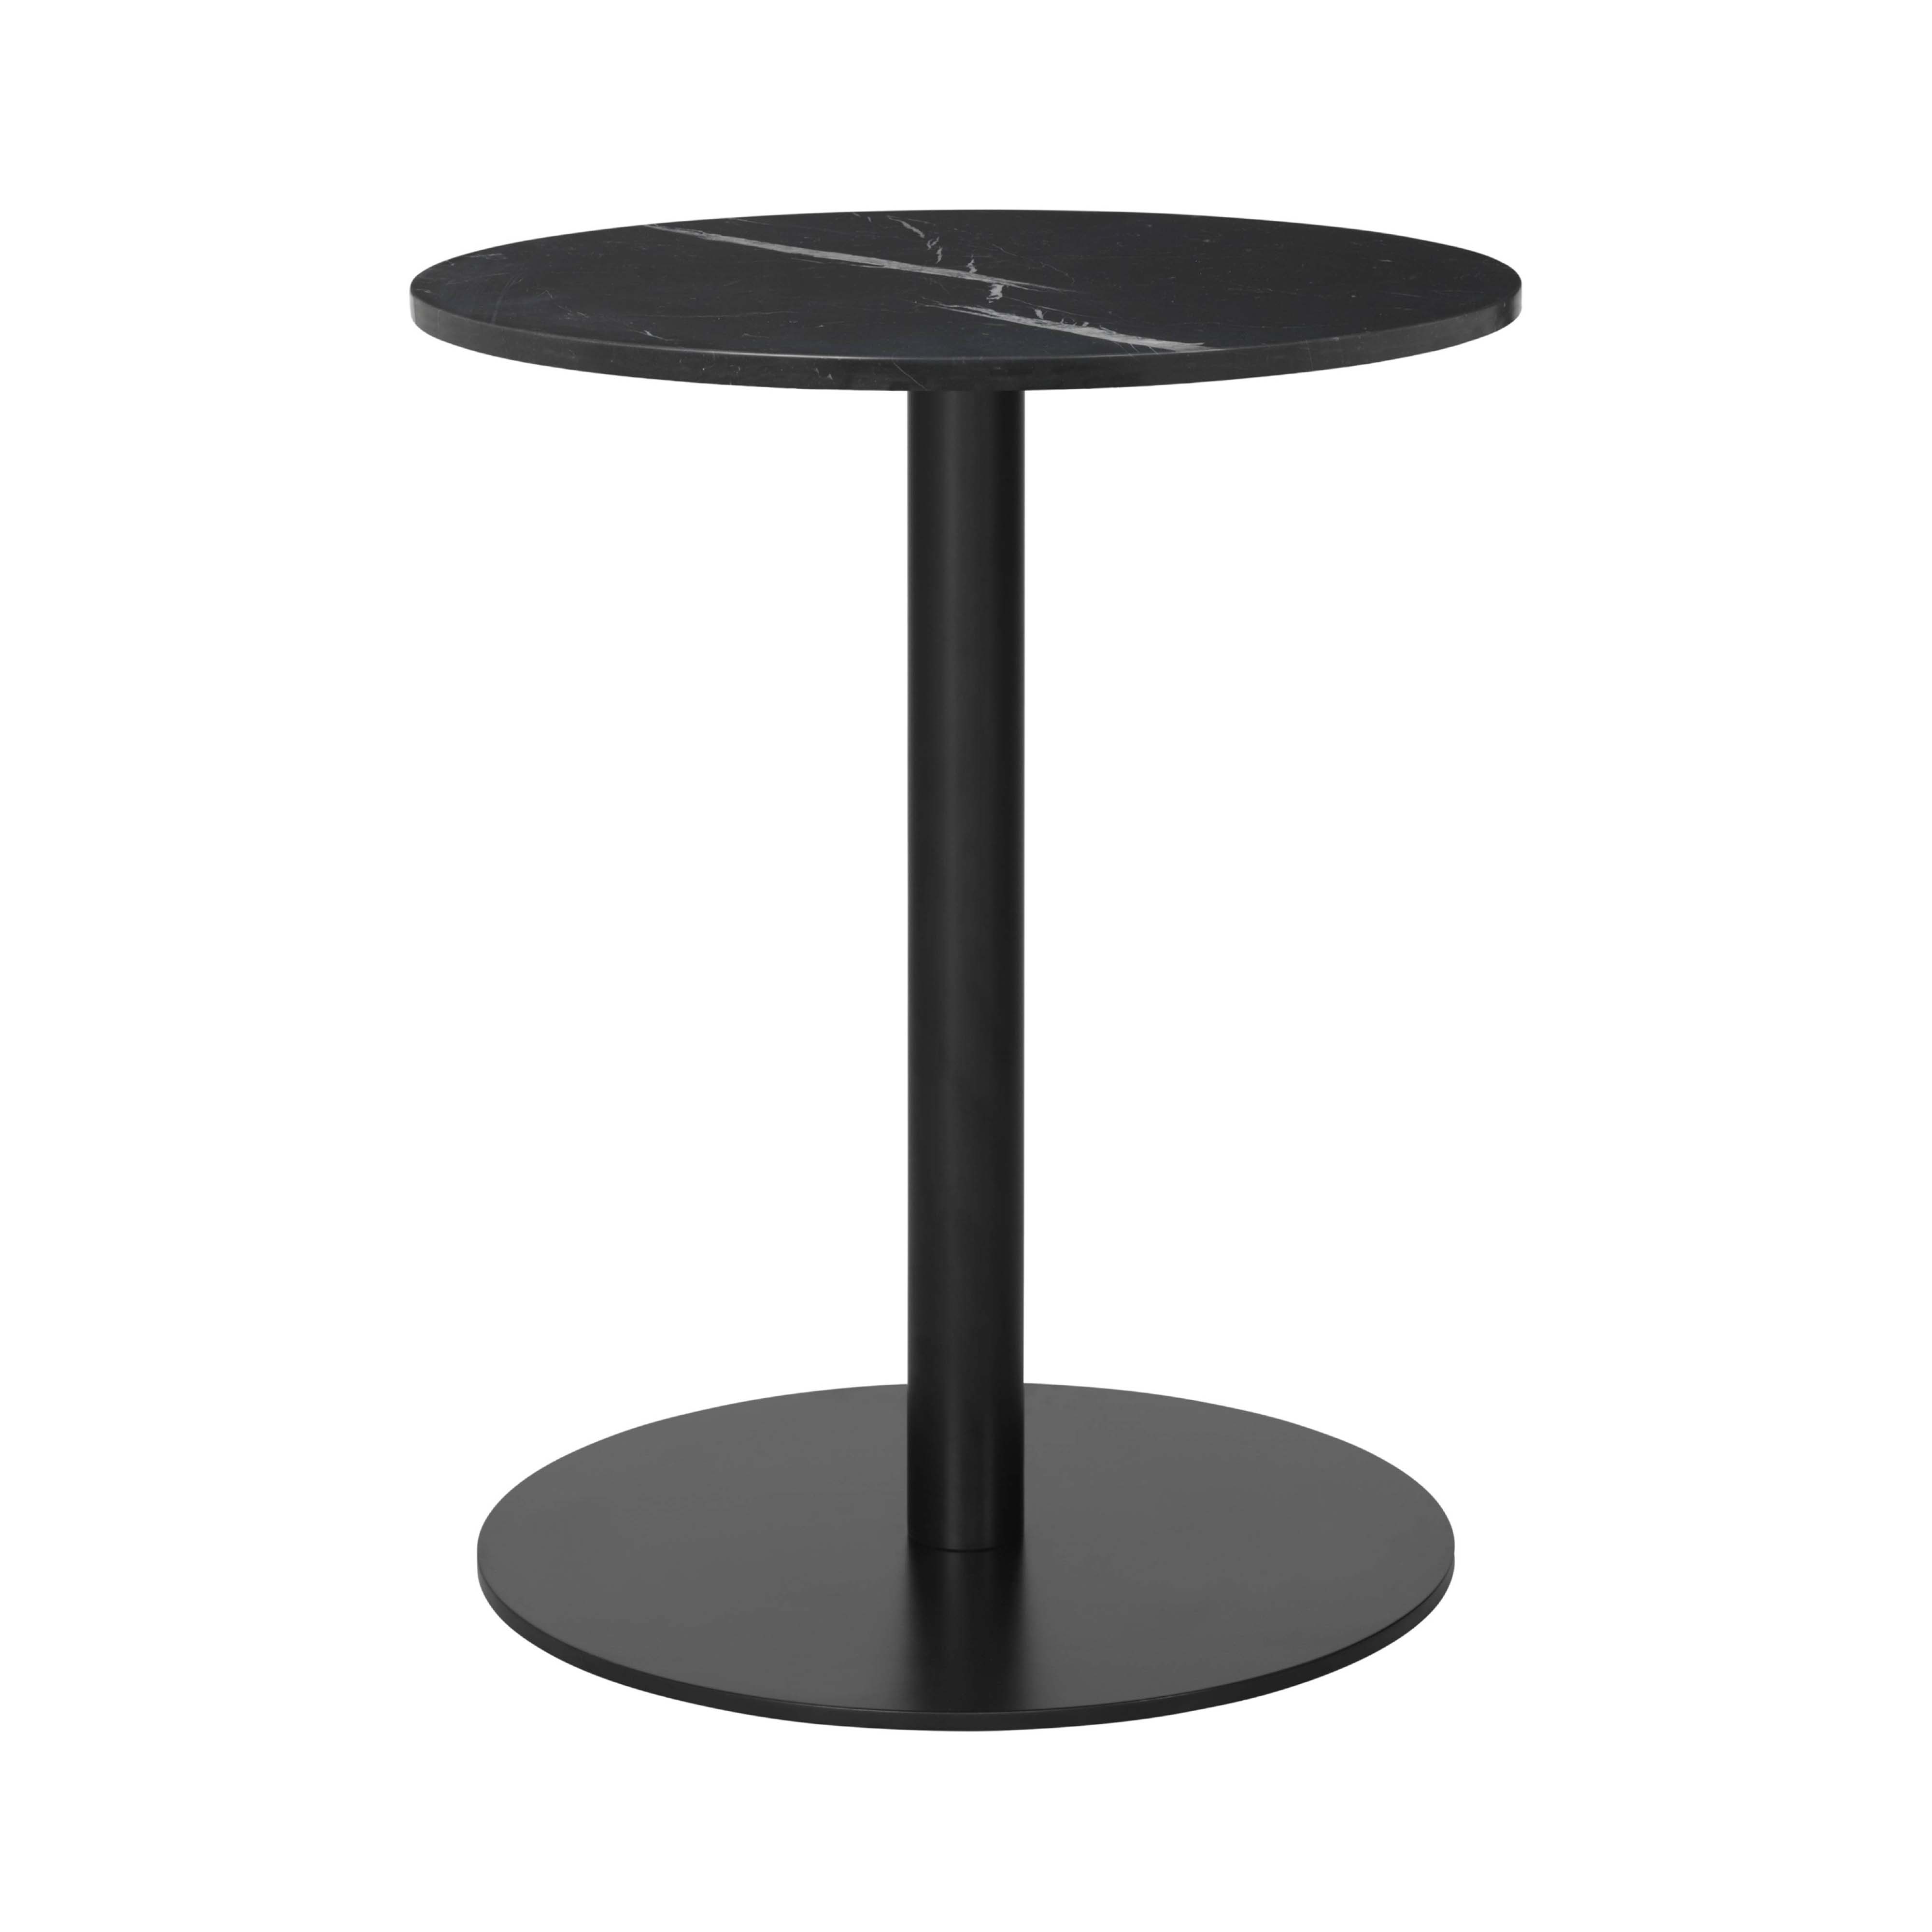 Gubi 1.0 Dining Table: Round + Small - 23.6